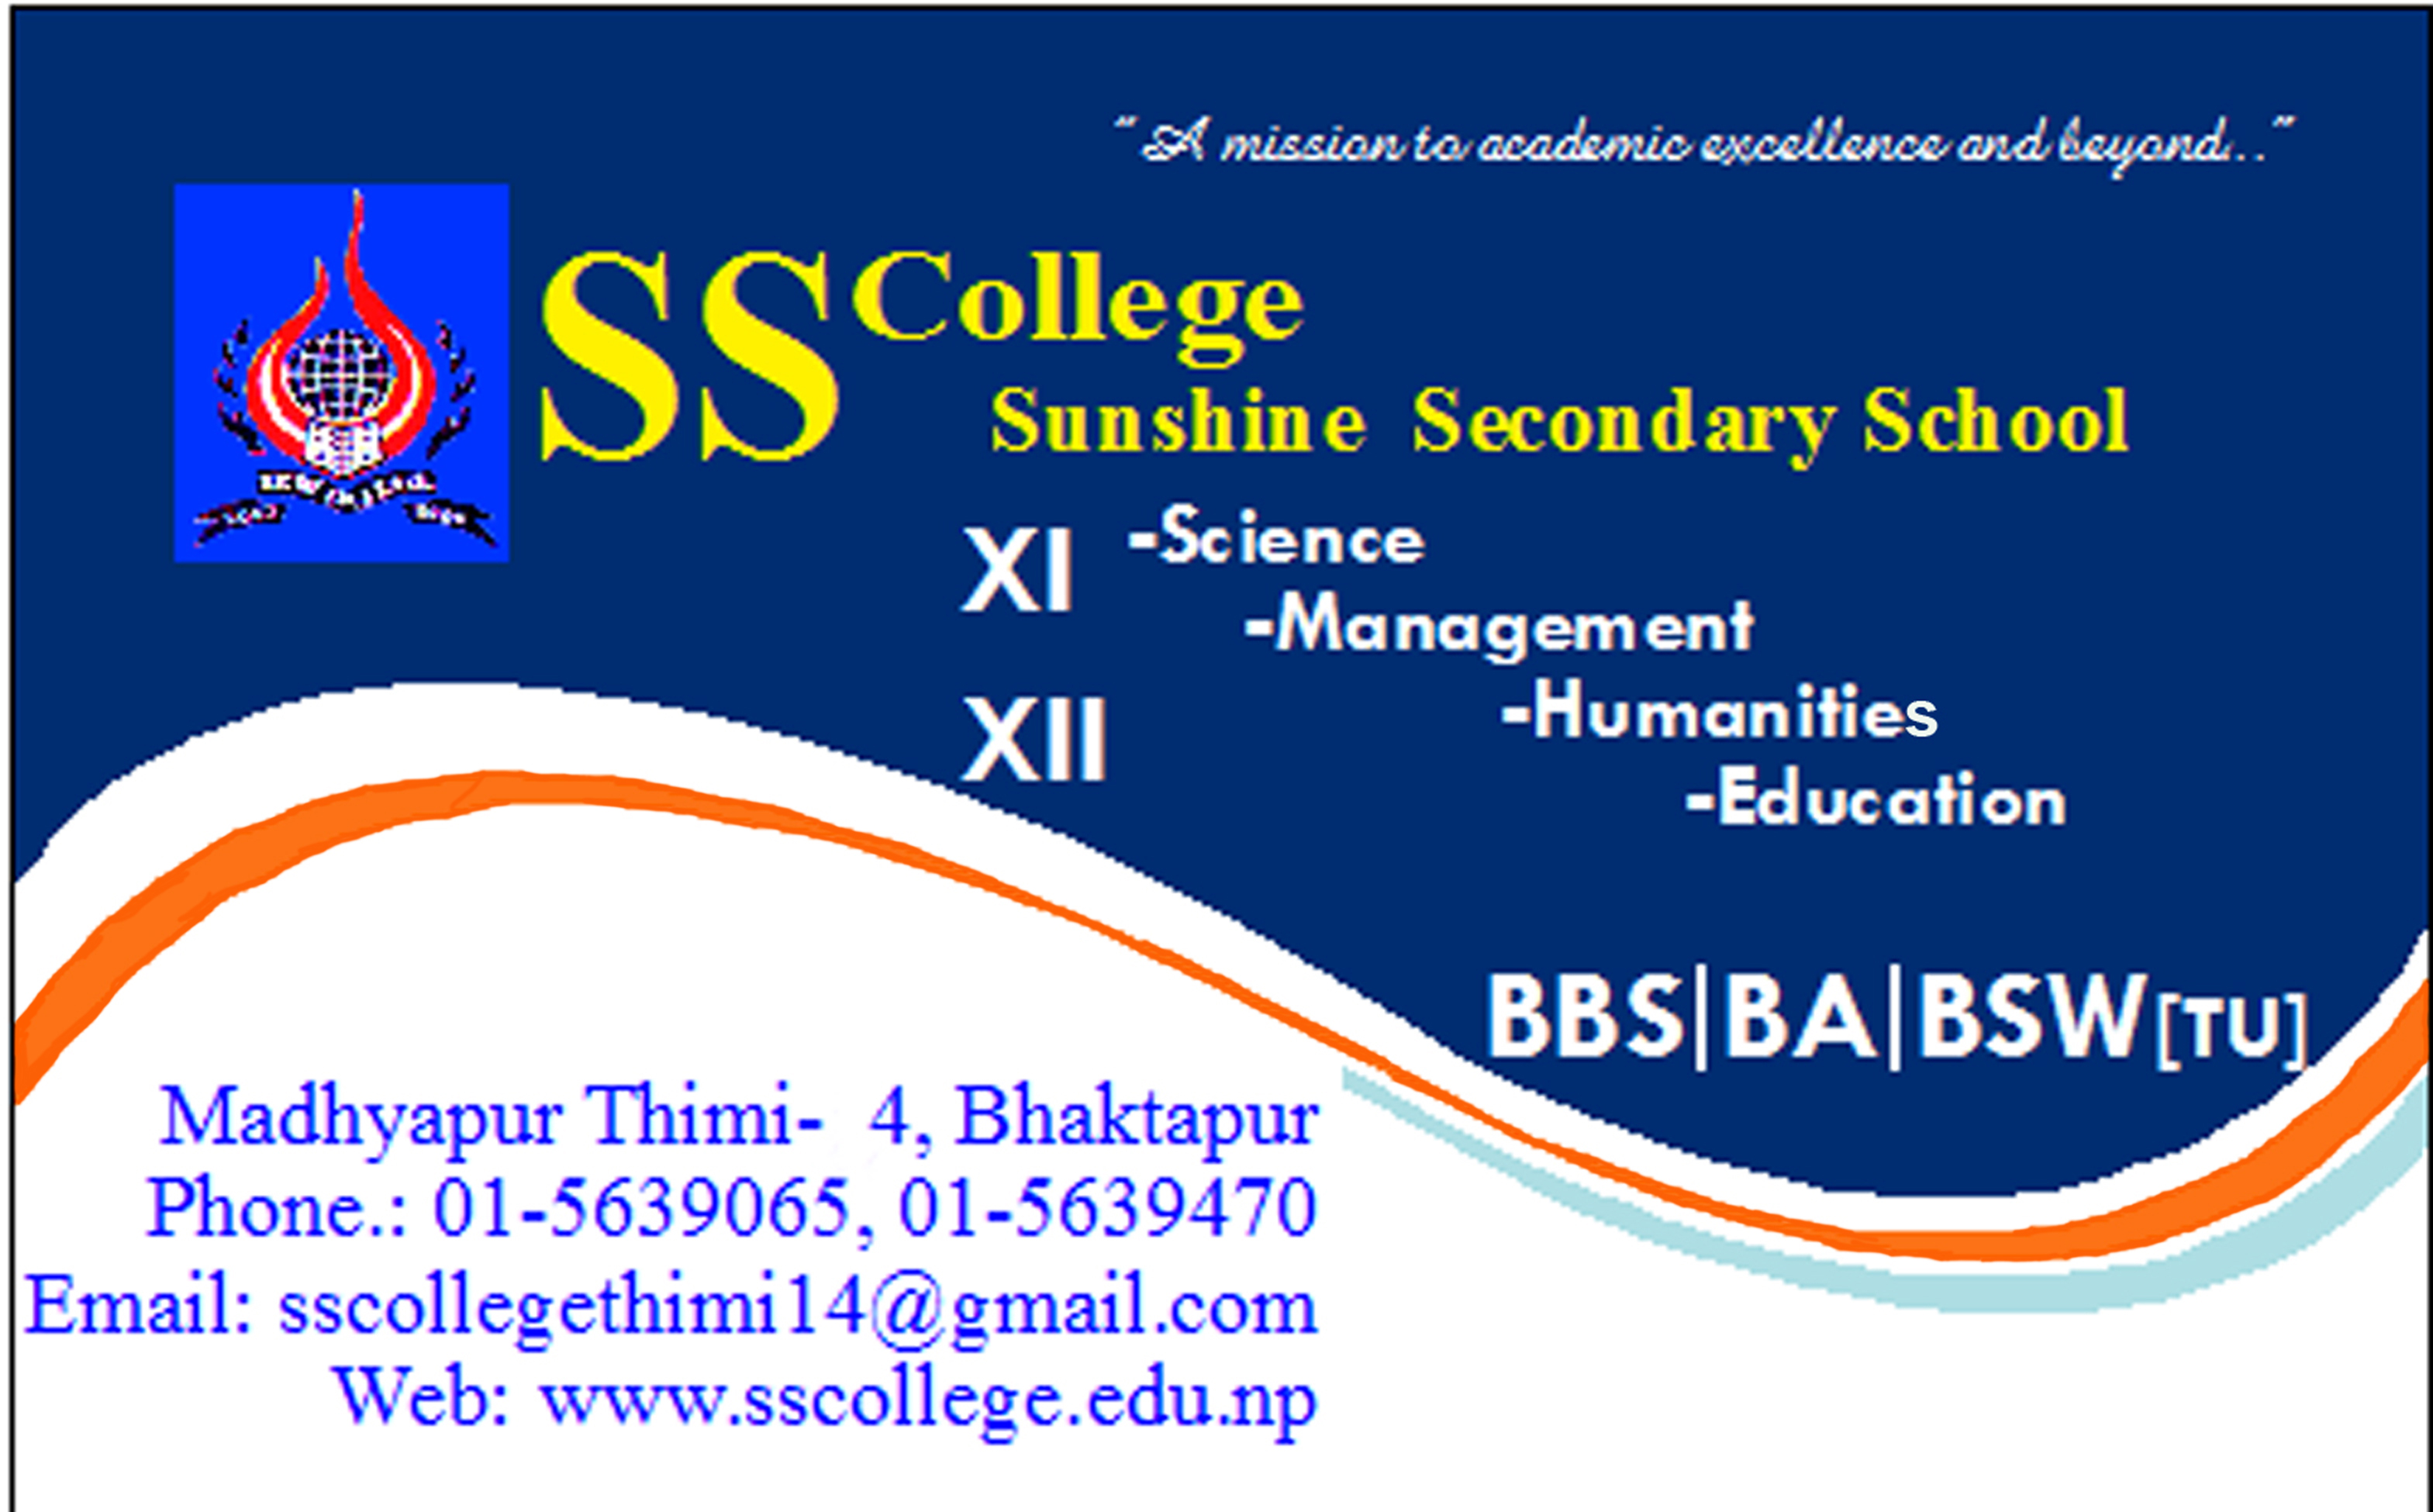 SS College